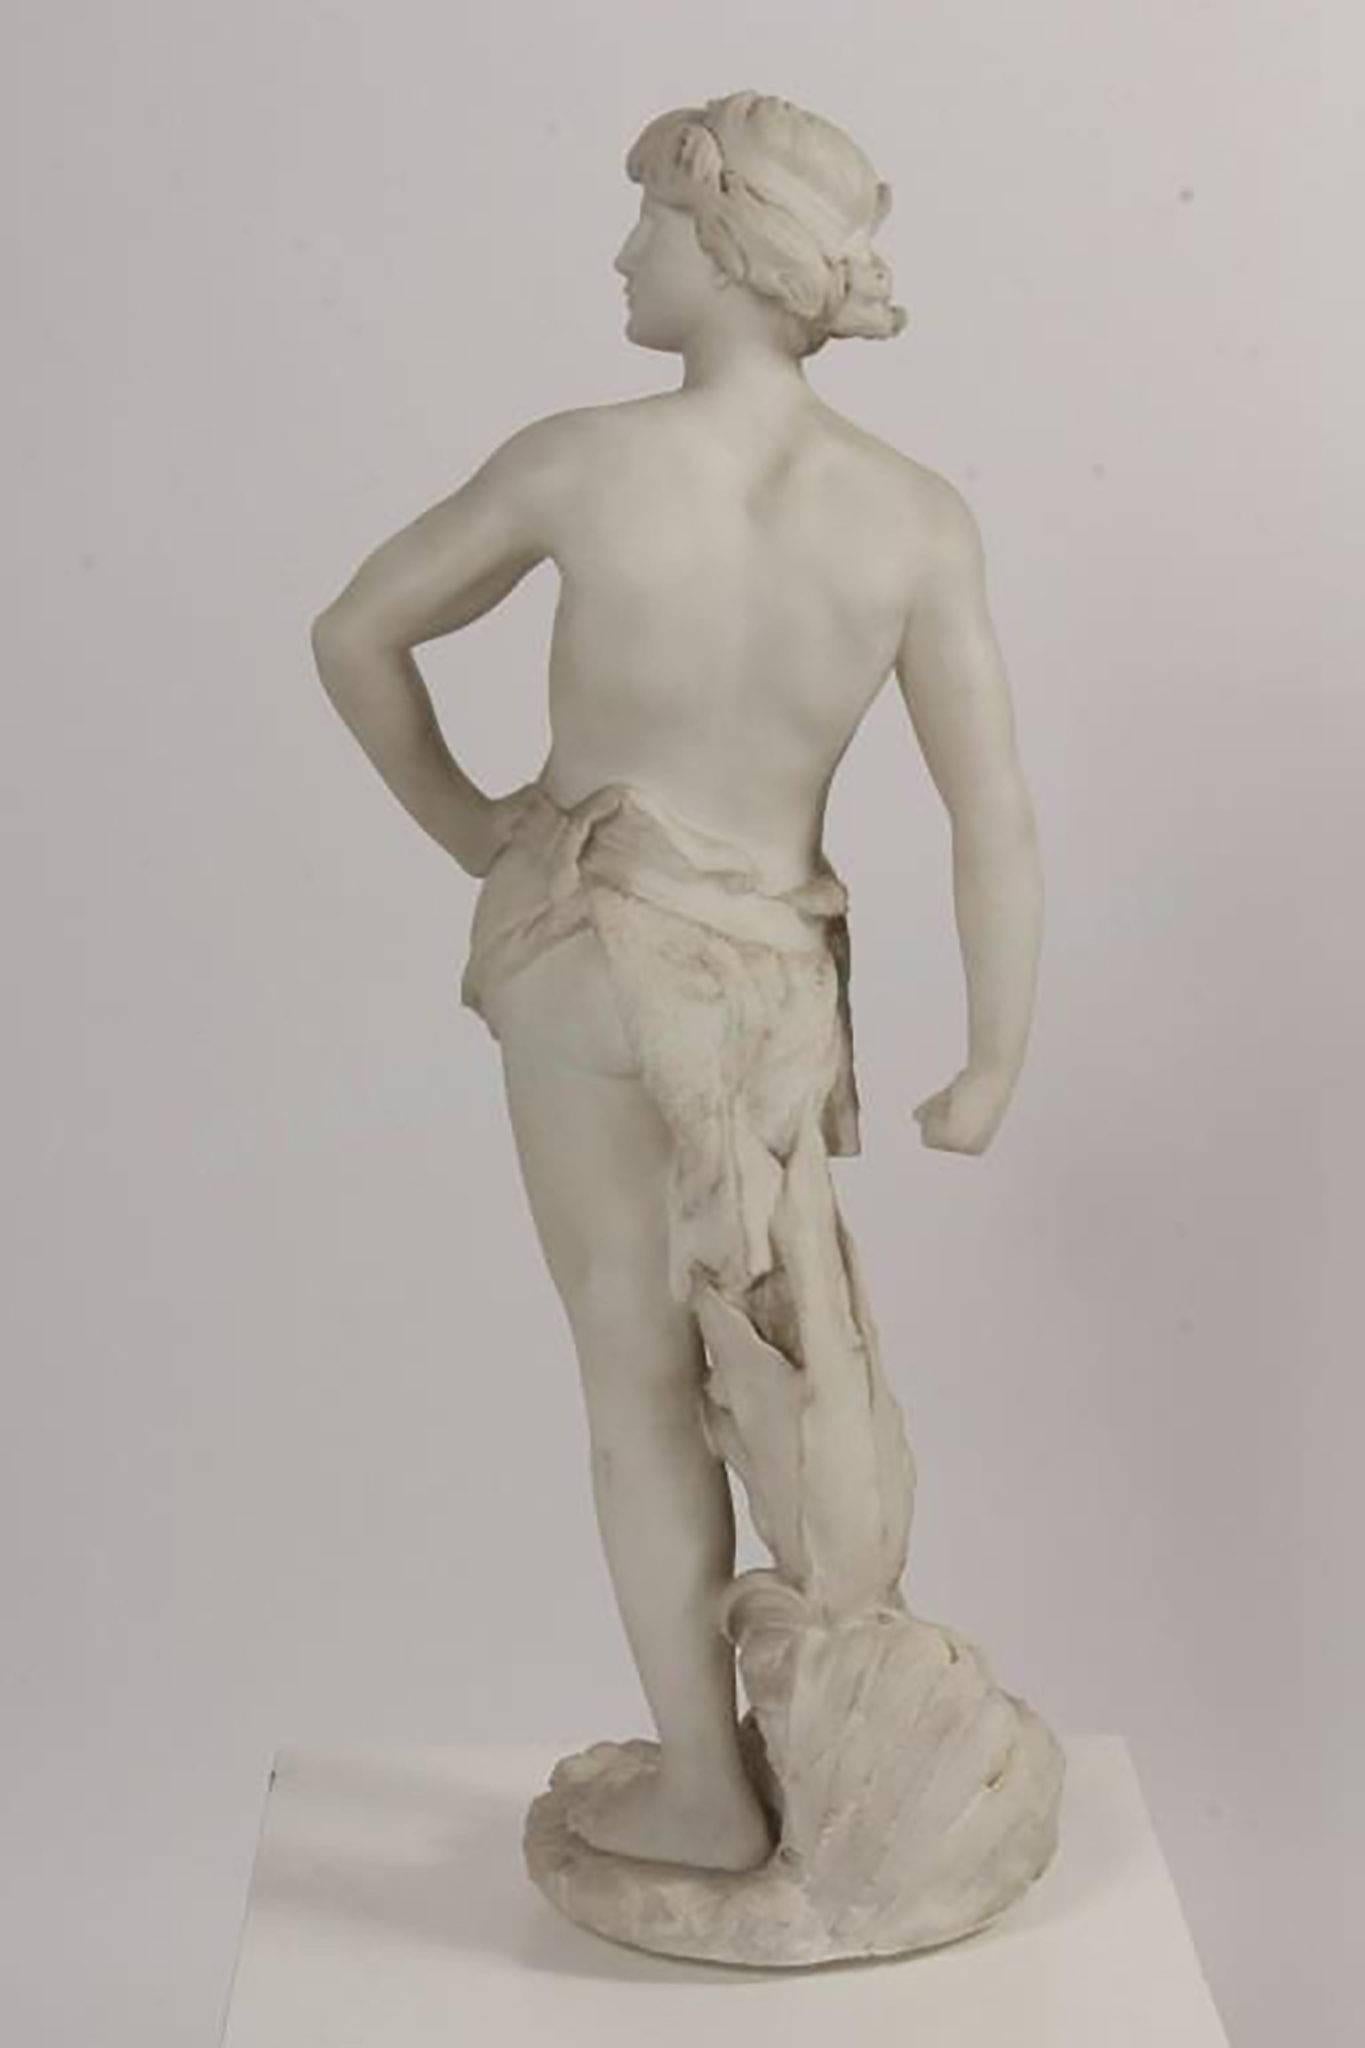 An Original Marble Sculpture of the Biblical David, girded with his stones, preparing to throw at Goliath  Italian Marble Statue  Dimensions: 30″ H (2 1/2 Ft tall)  Unsigned  Condition: Very Good Condition; May be missing a sling in David’s right